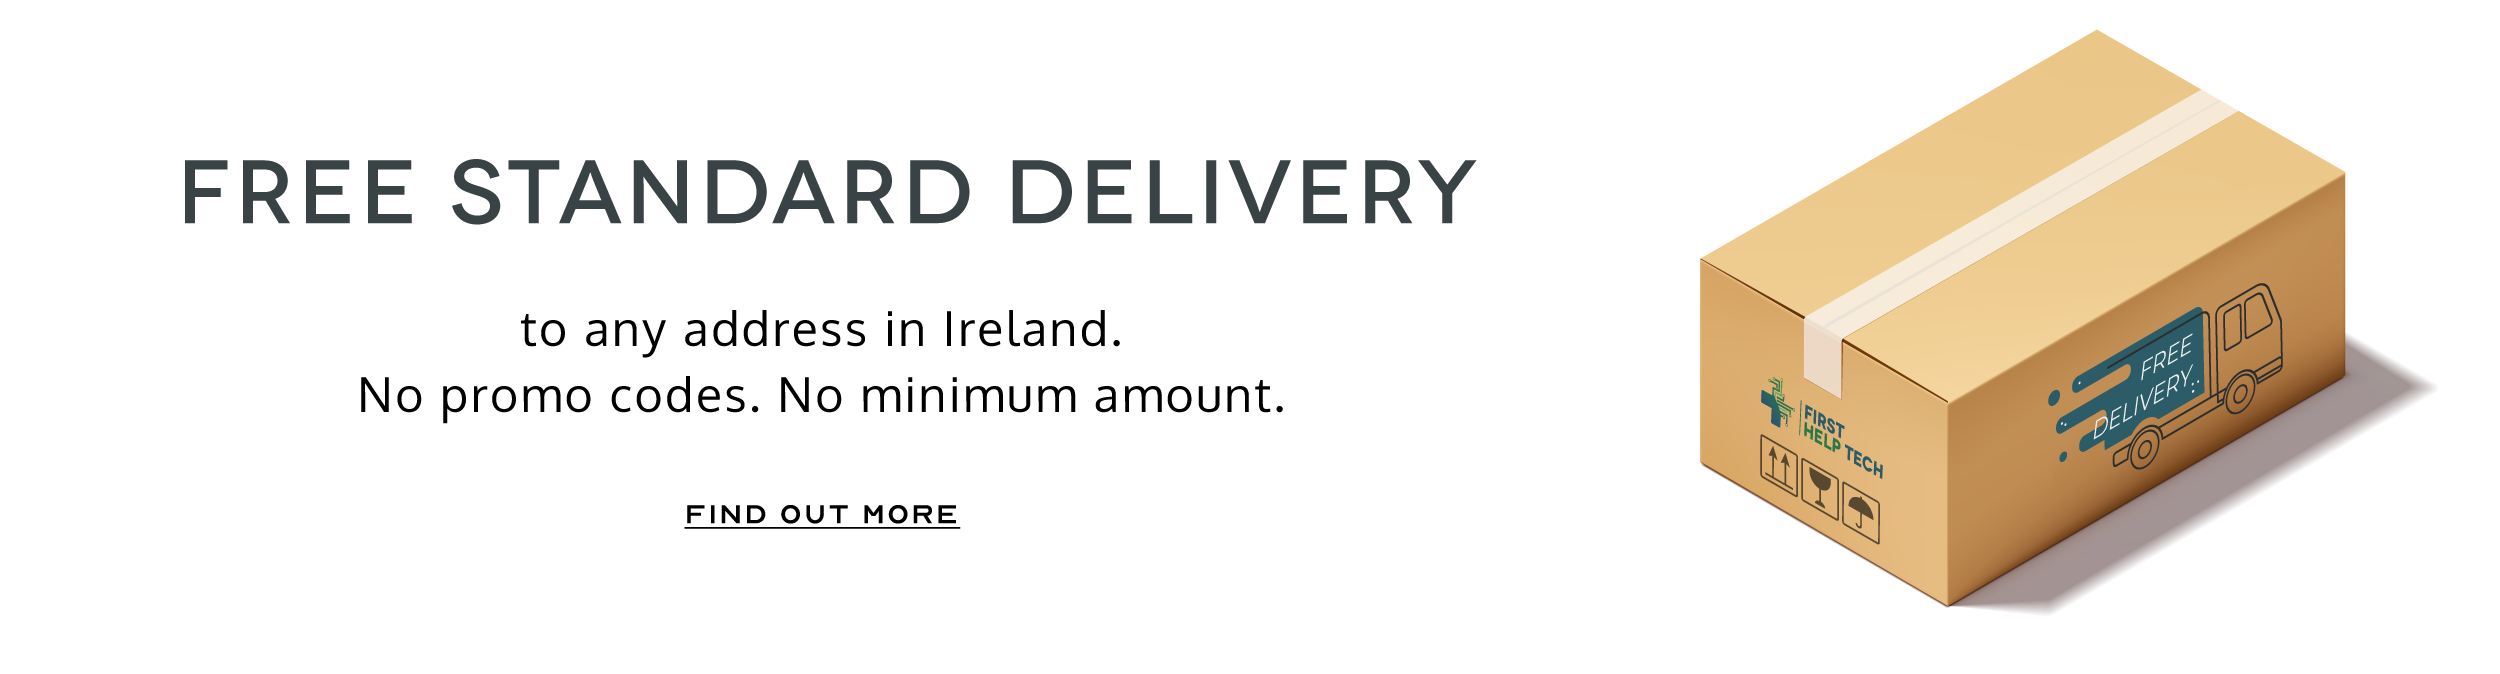 We deliver to Ireland for Free!